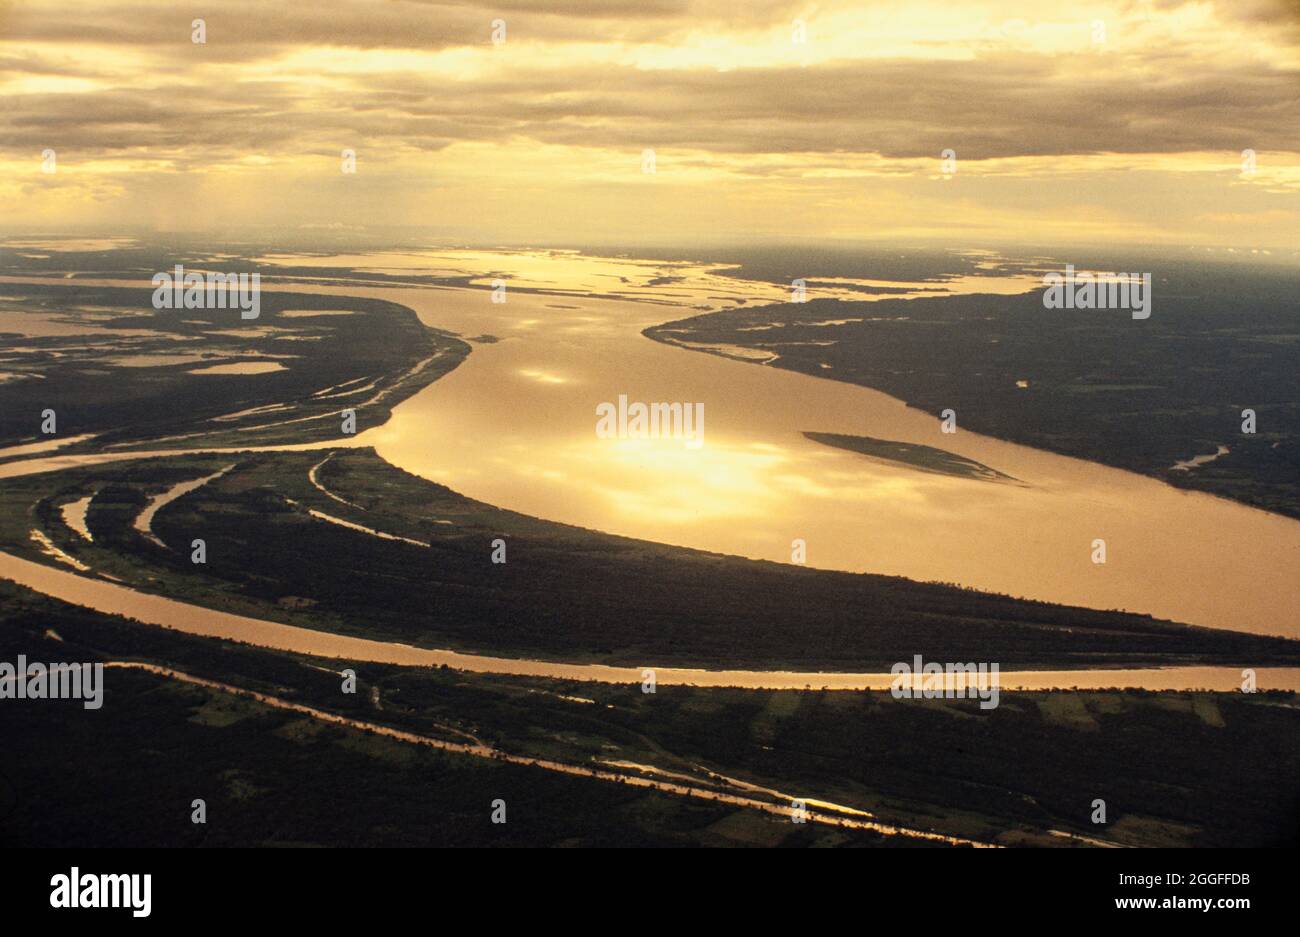 Aerial view of Amazon rain forest - wide river spreads over patches of intact and deforested areas interspersed. Stock Photo